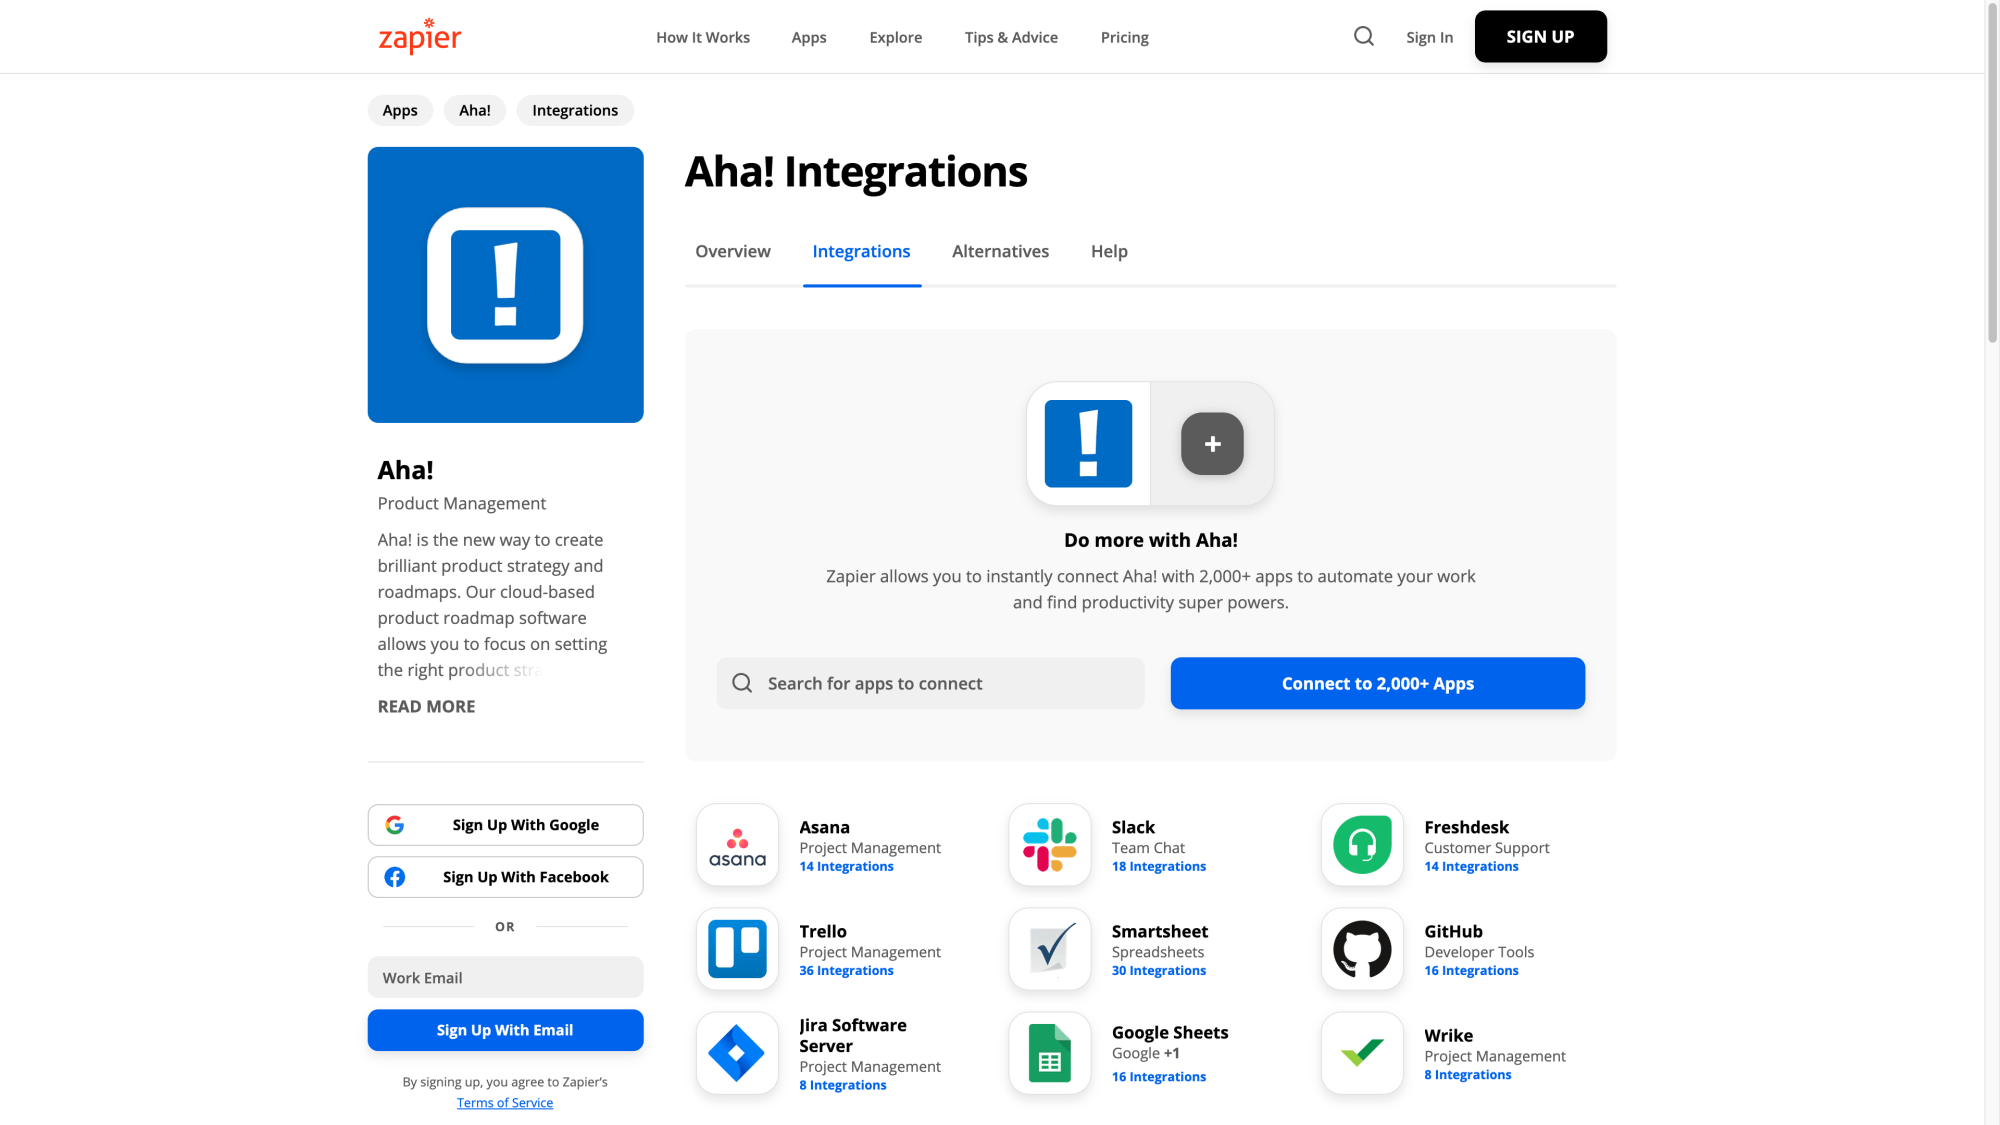 The Aha! integration page on Zapier